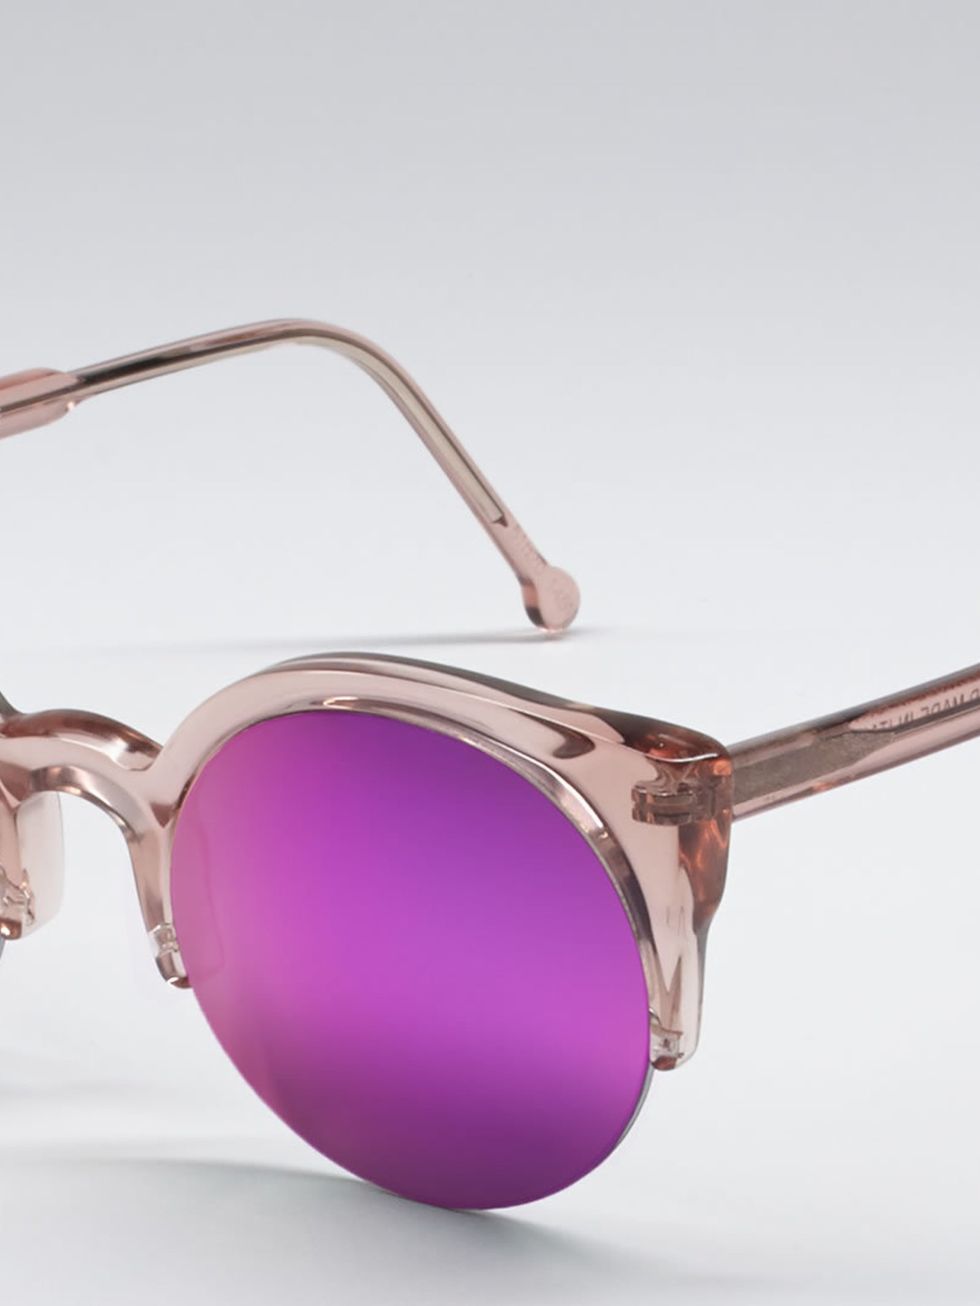 Eyewear, Vision care, Glasses, Product, Brown, Purple, Photograph, Glass, Lavender, Magenta, 